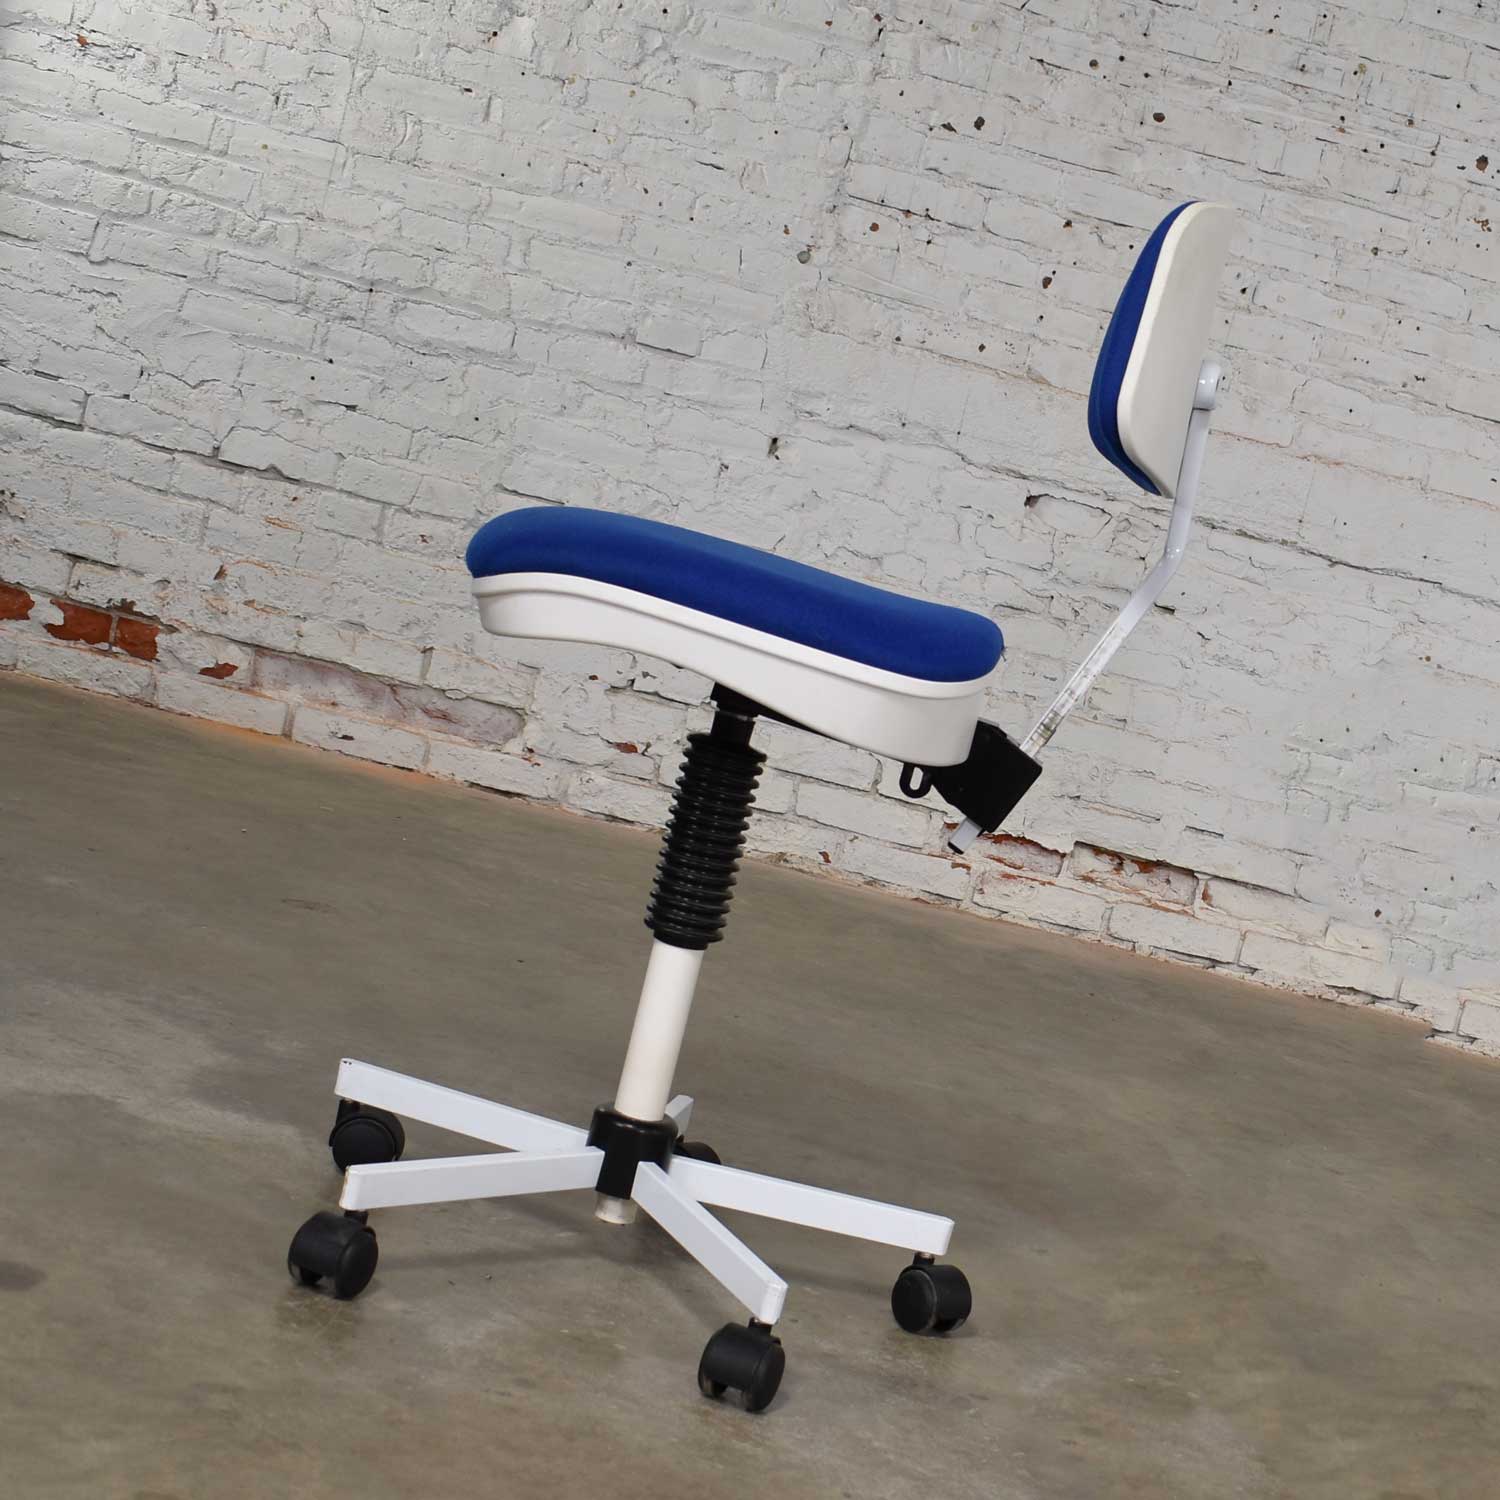 Rabami Made in Denmark Task Chair Blue & White Attributed to Kevi by Jorgen Rasmussen